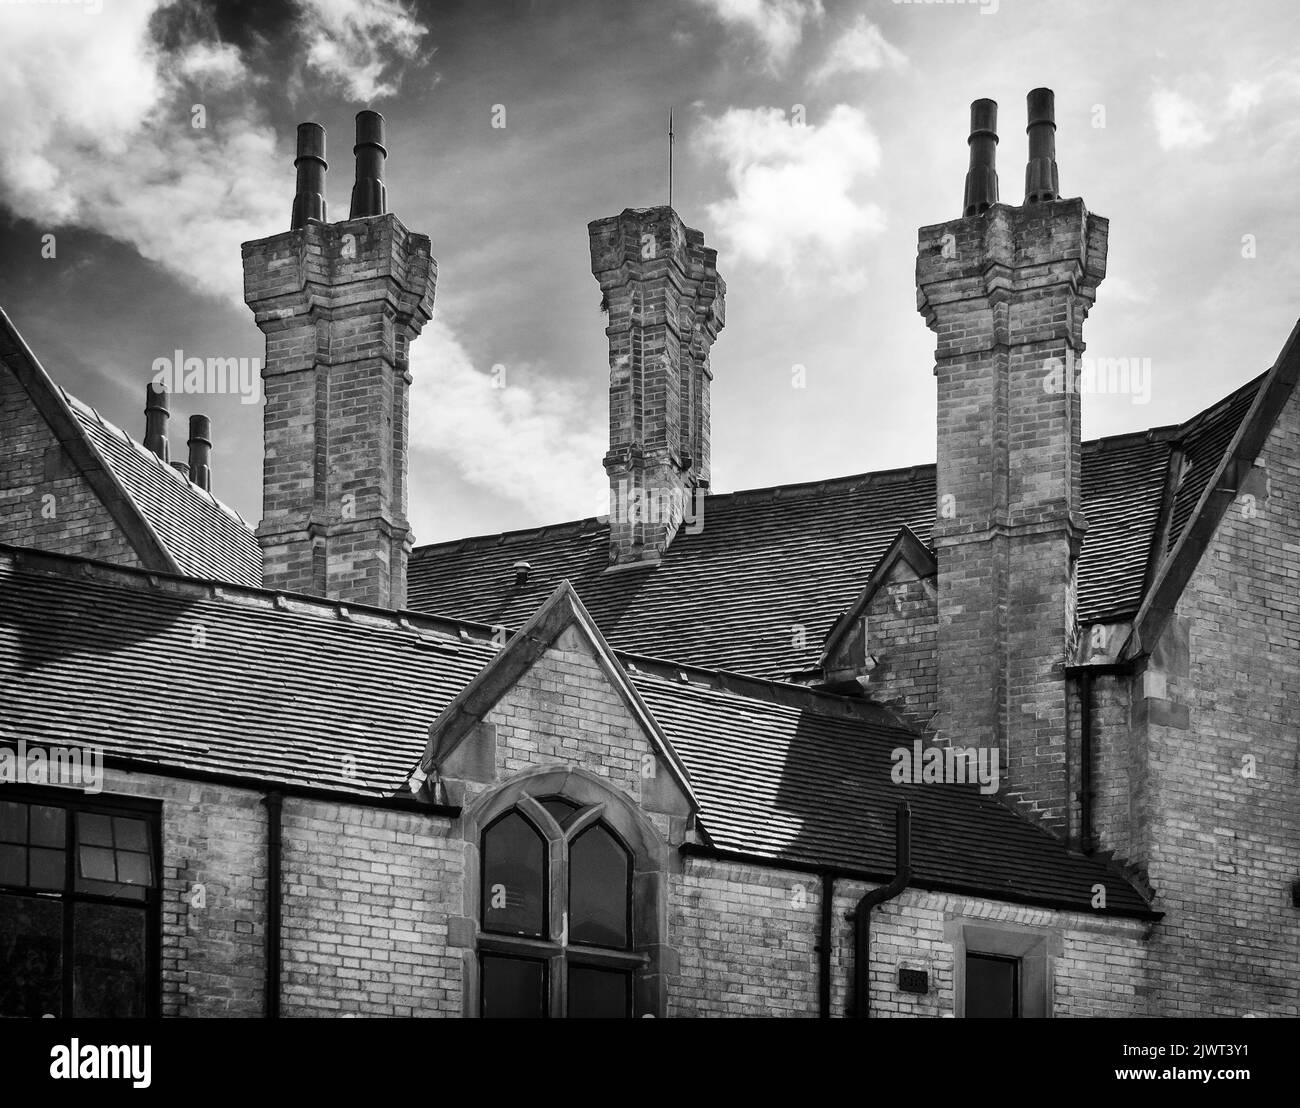 Chimneys on a historic roofline in Stoke on Trent. A luminous cloud pattern adds to the scene Stock Photo